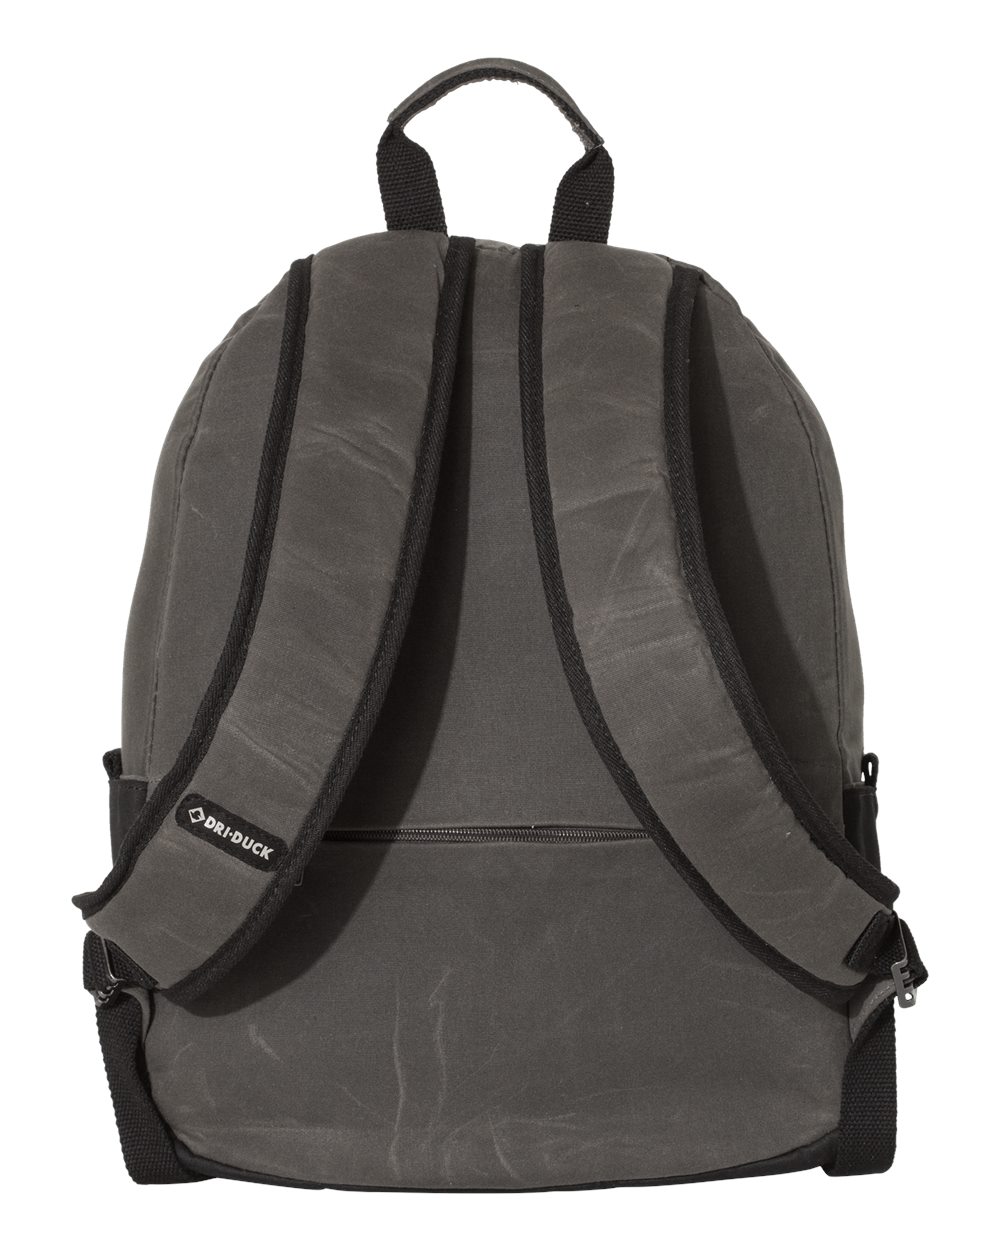 20L Essential Backpack - 1401-